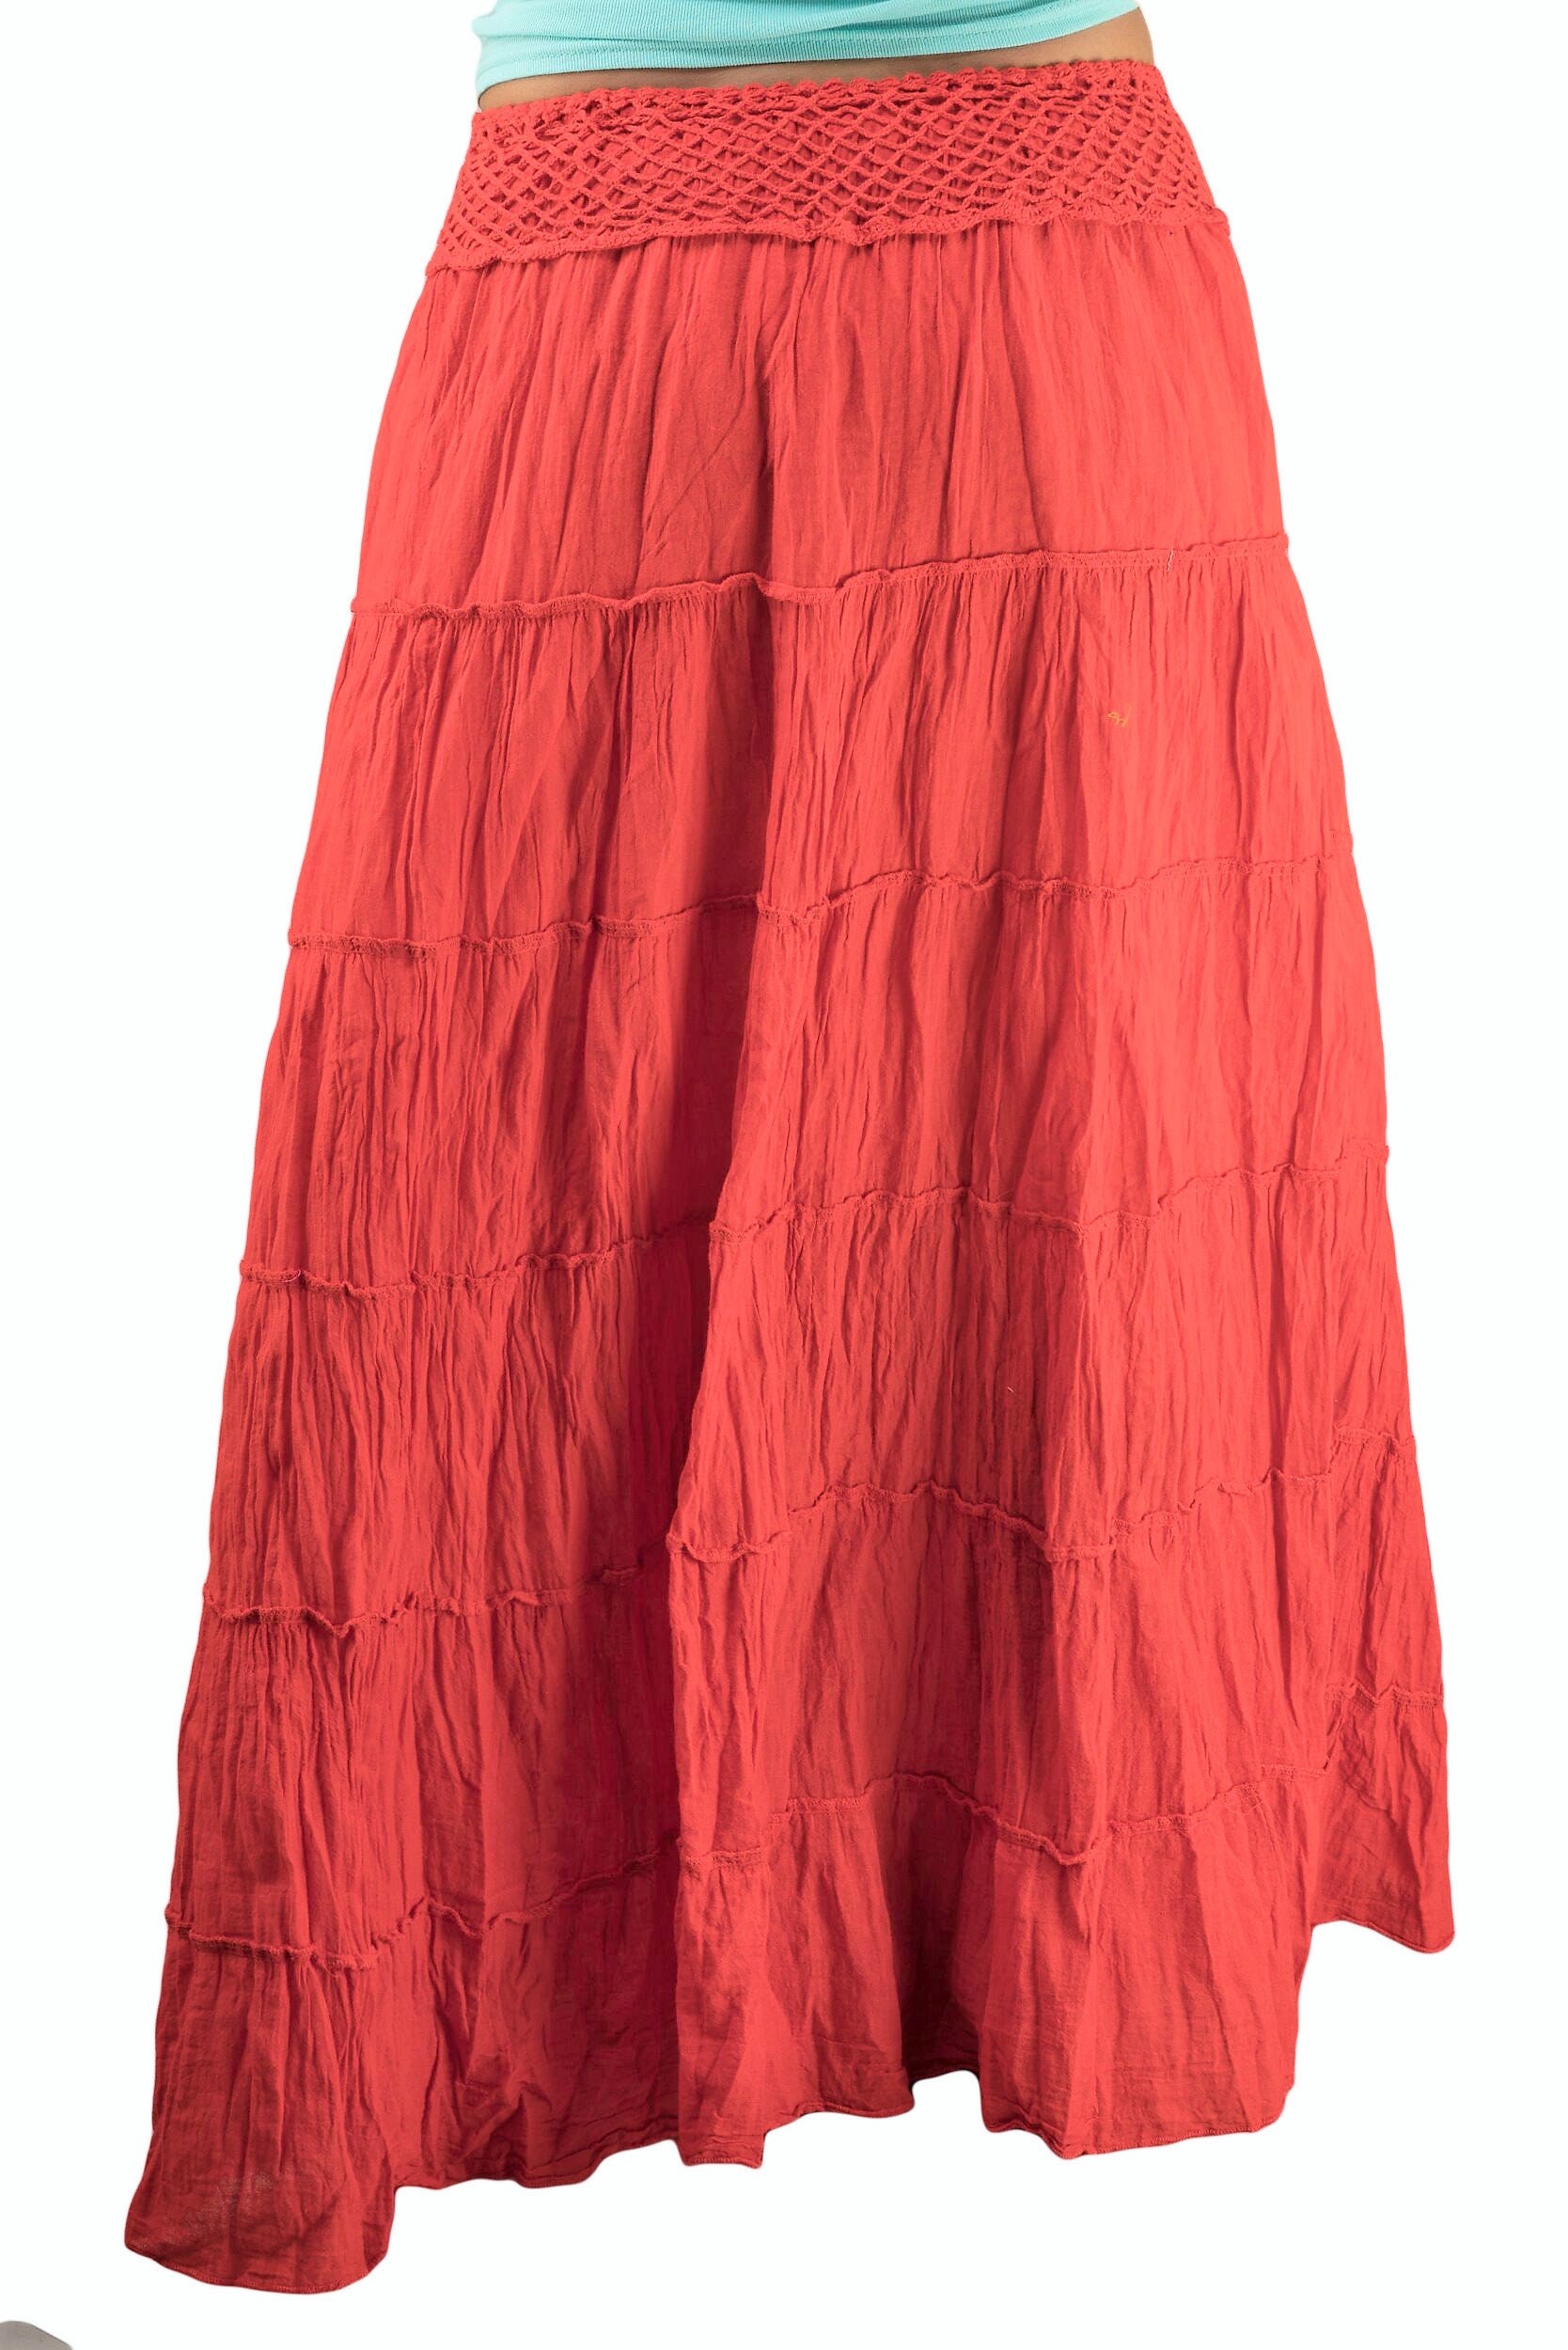 Red Gypsy Skirt Boho Skirts Tiered Cotton Peasant Hippie - Etsy